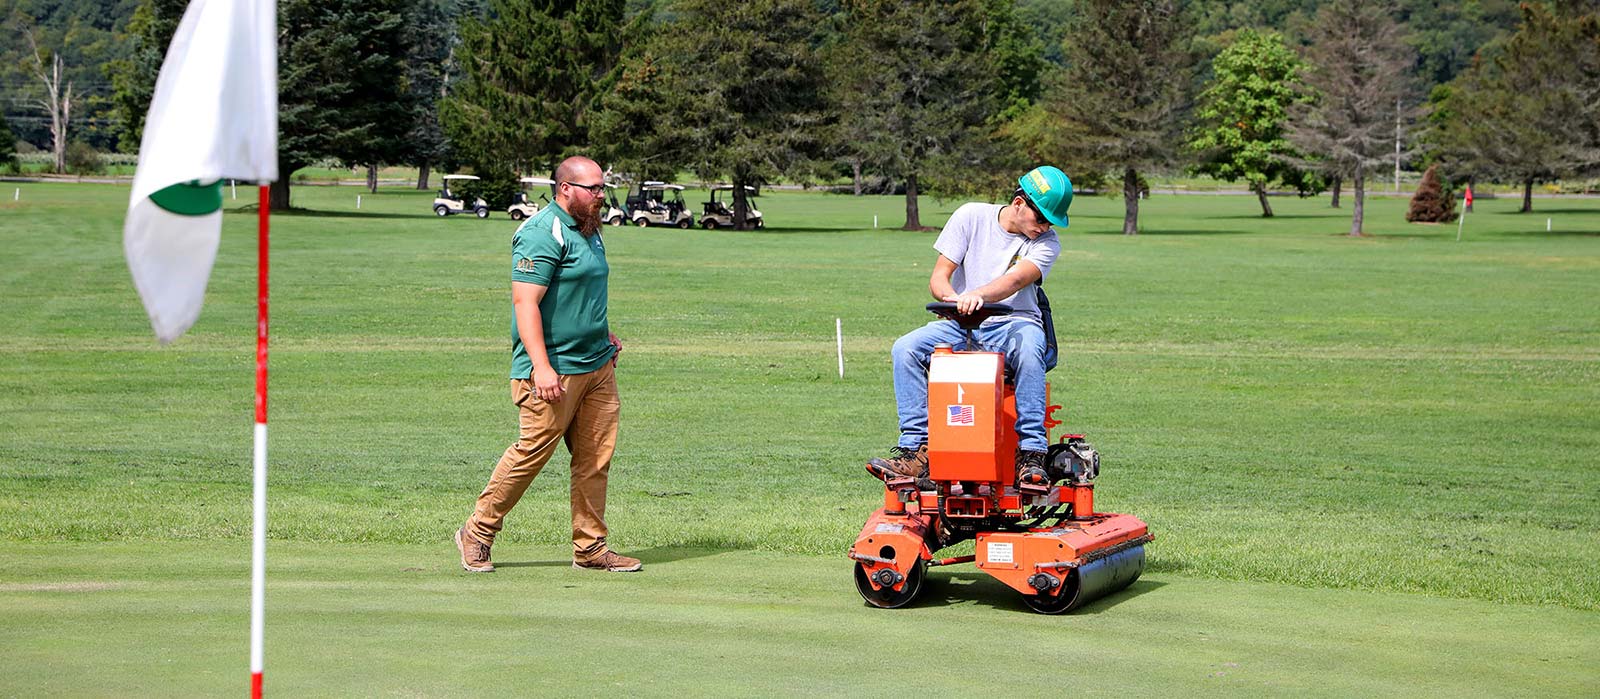 Professor teaching a student how to groom a golf green